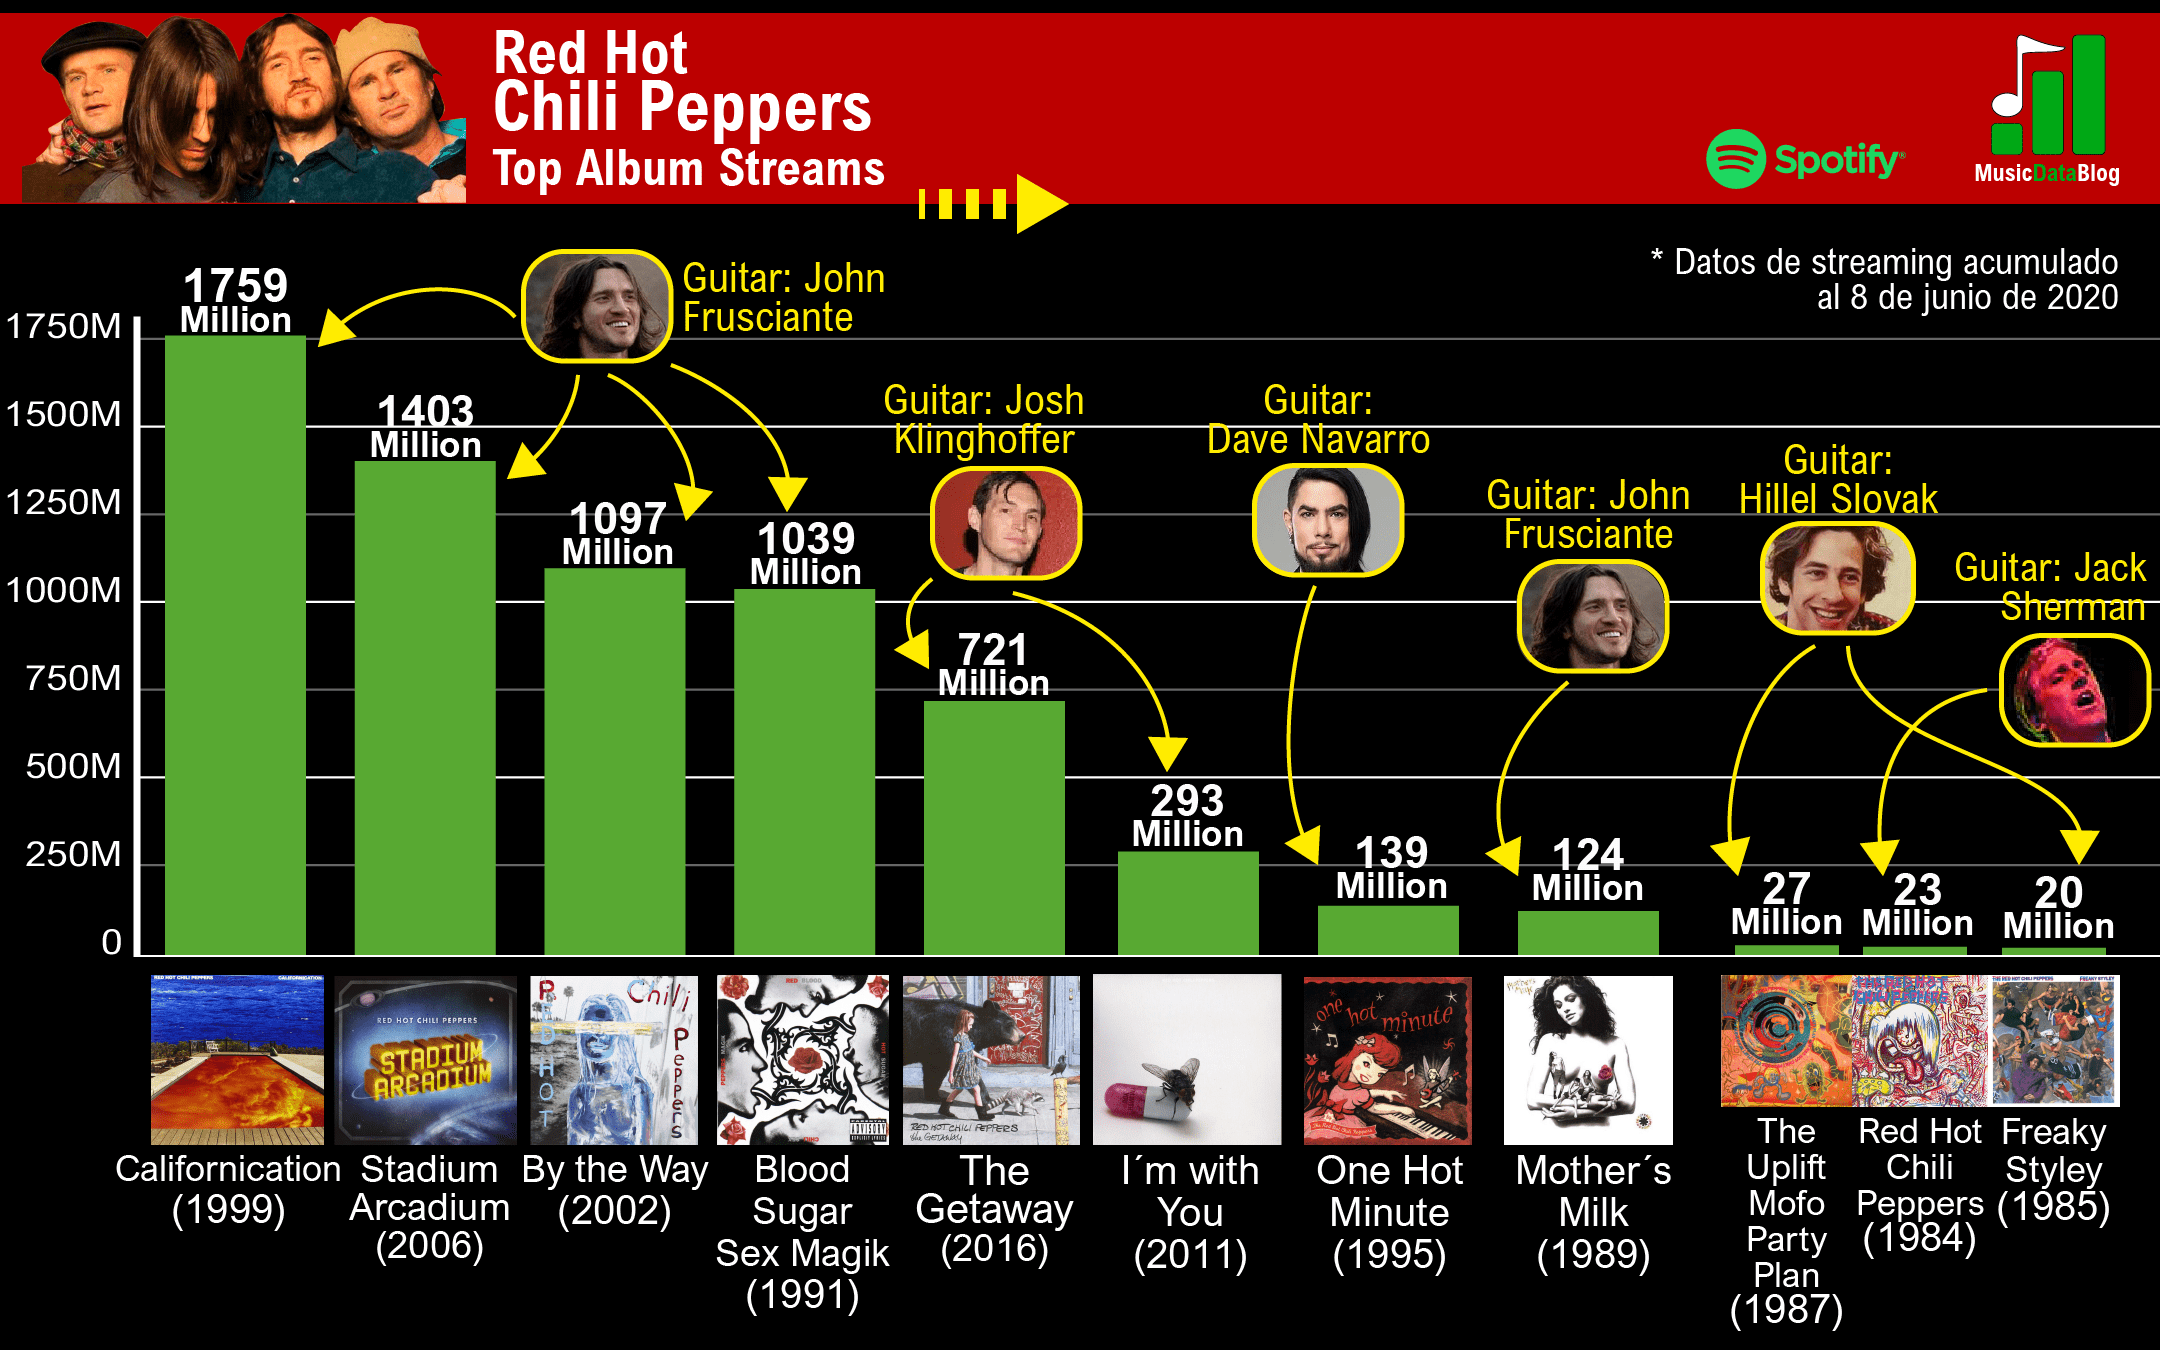 supplere Mars Skorpe Red Hot Chili Peppers discography in order of popularity in streams - Music  Data Blog